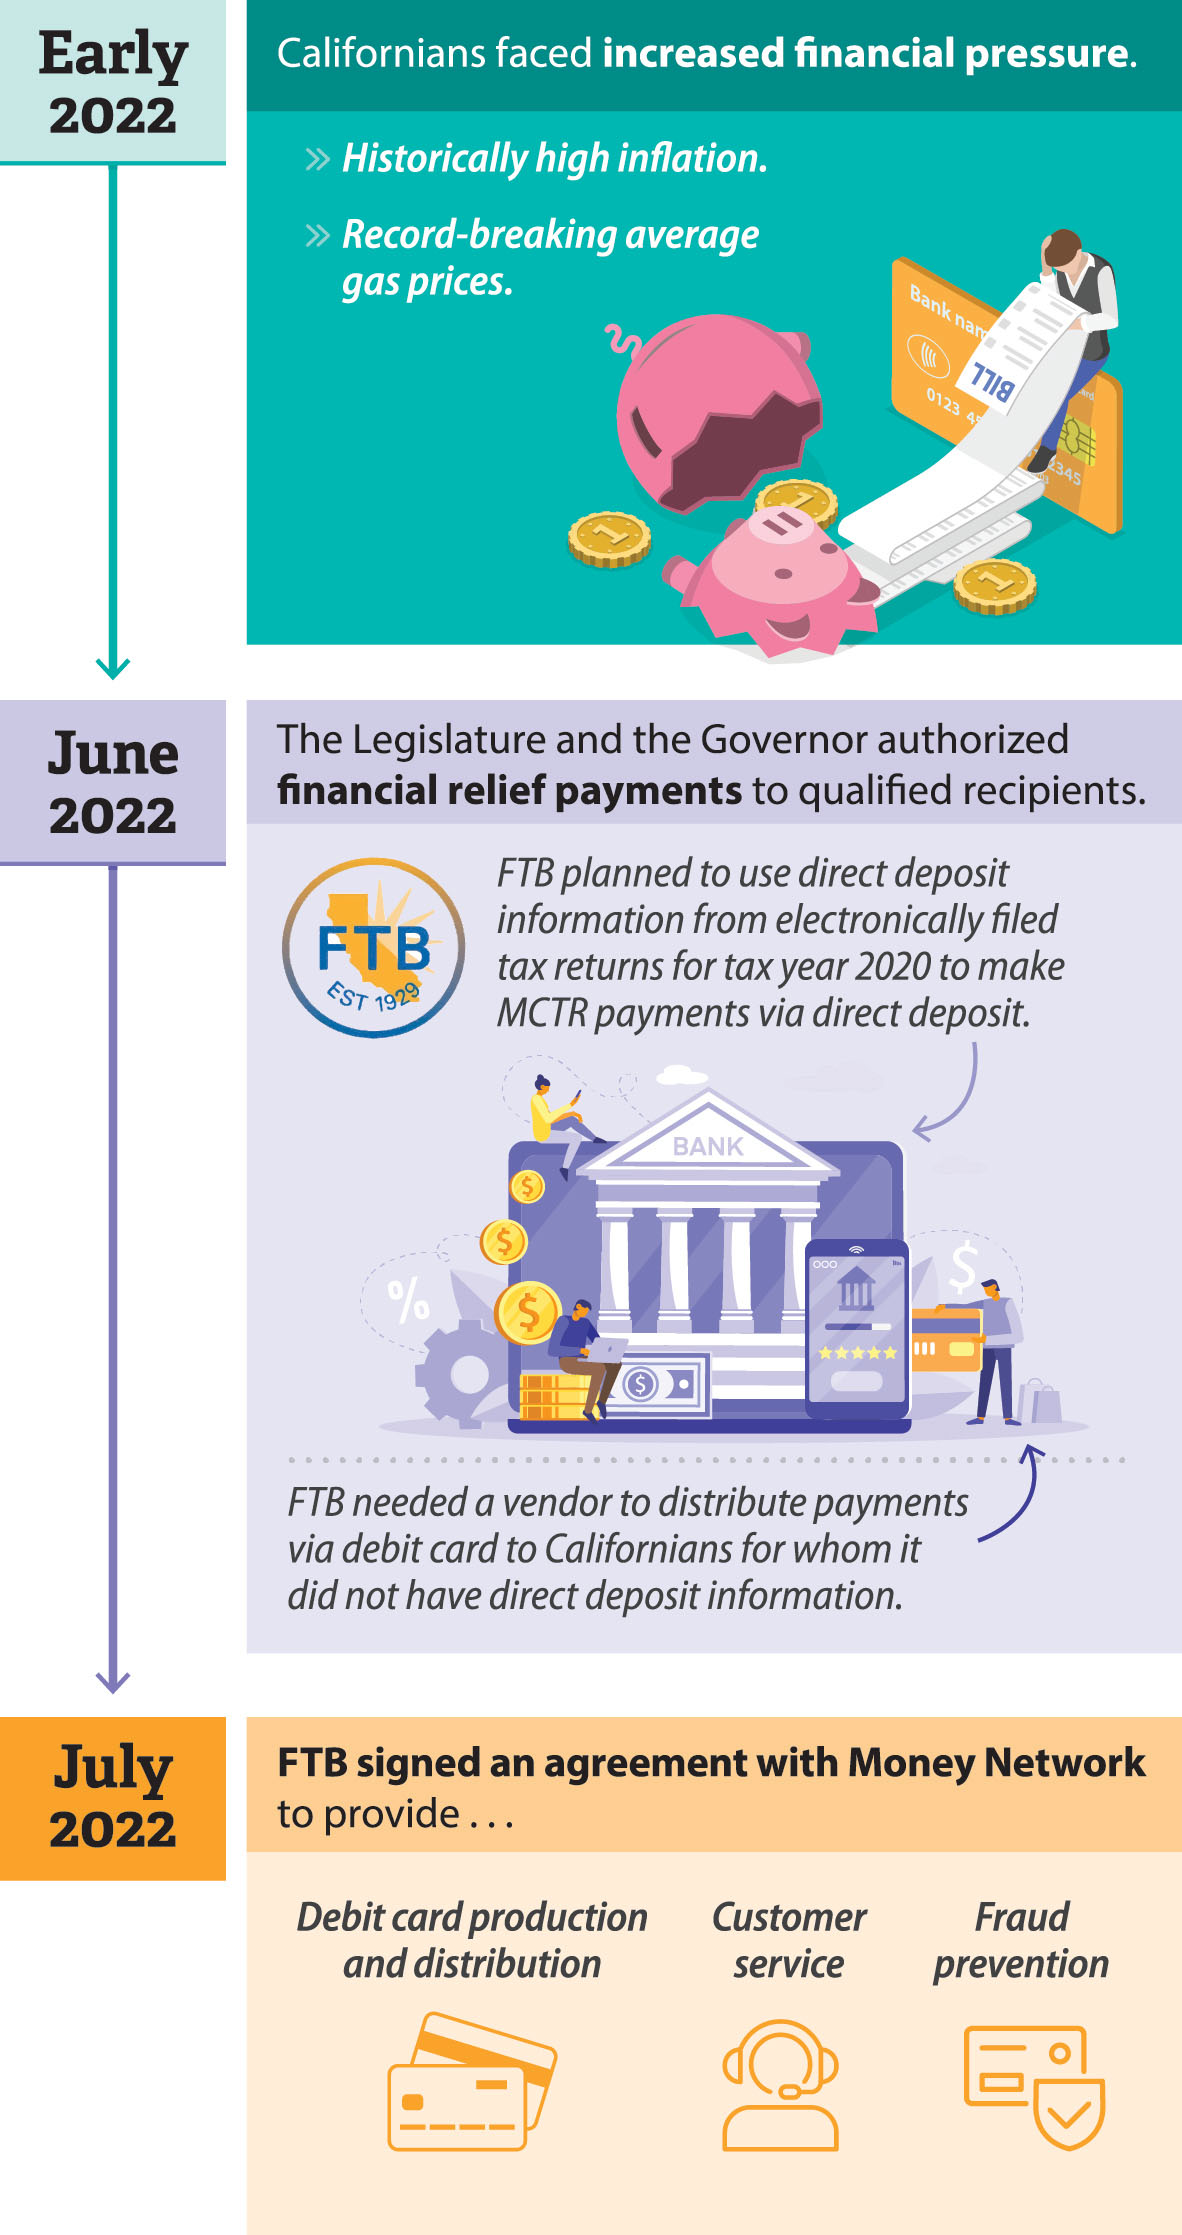 A timeline that starts with the economic pressures Californians faced that led the Legislature and Governor to authorize financial relief payments, which caused the Franchise Tax Board to contract with Money Network to provide related services.